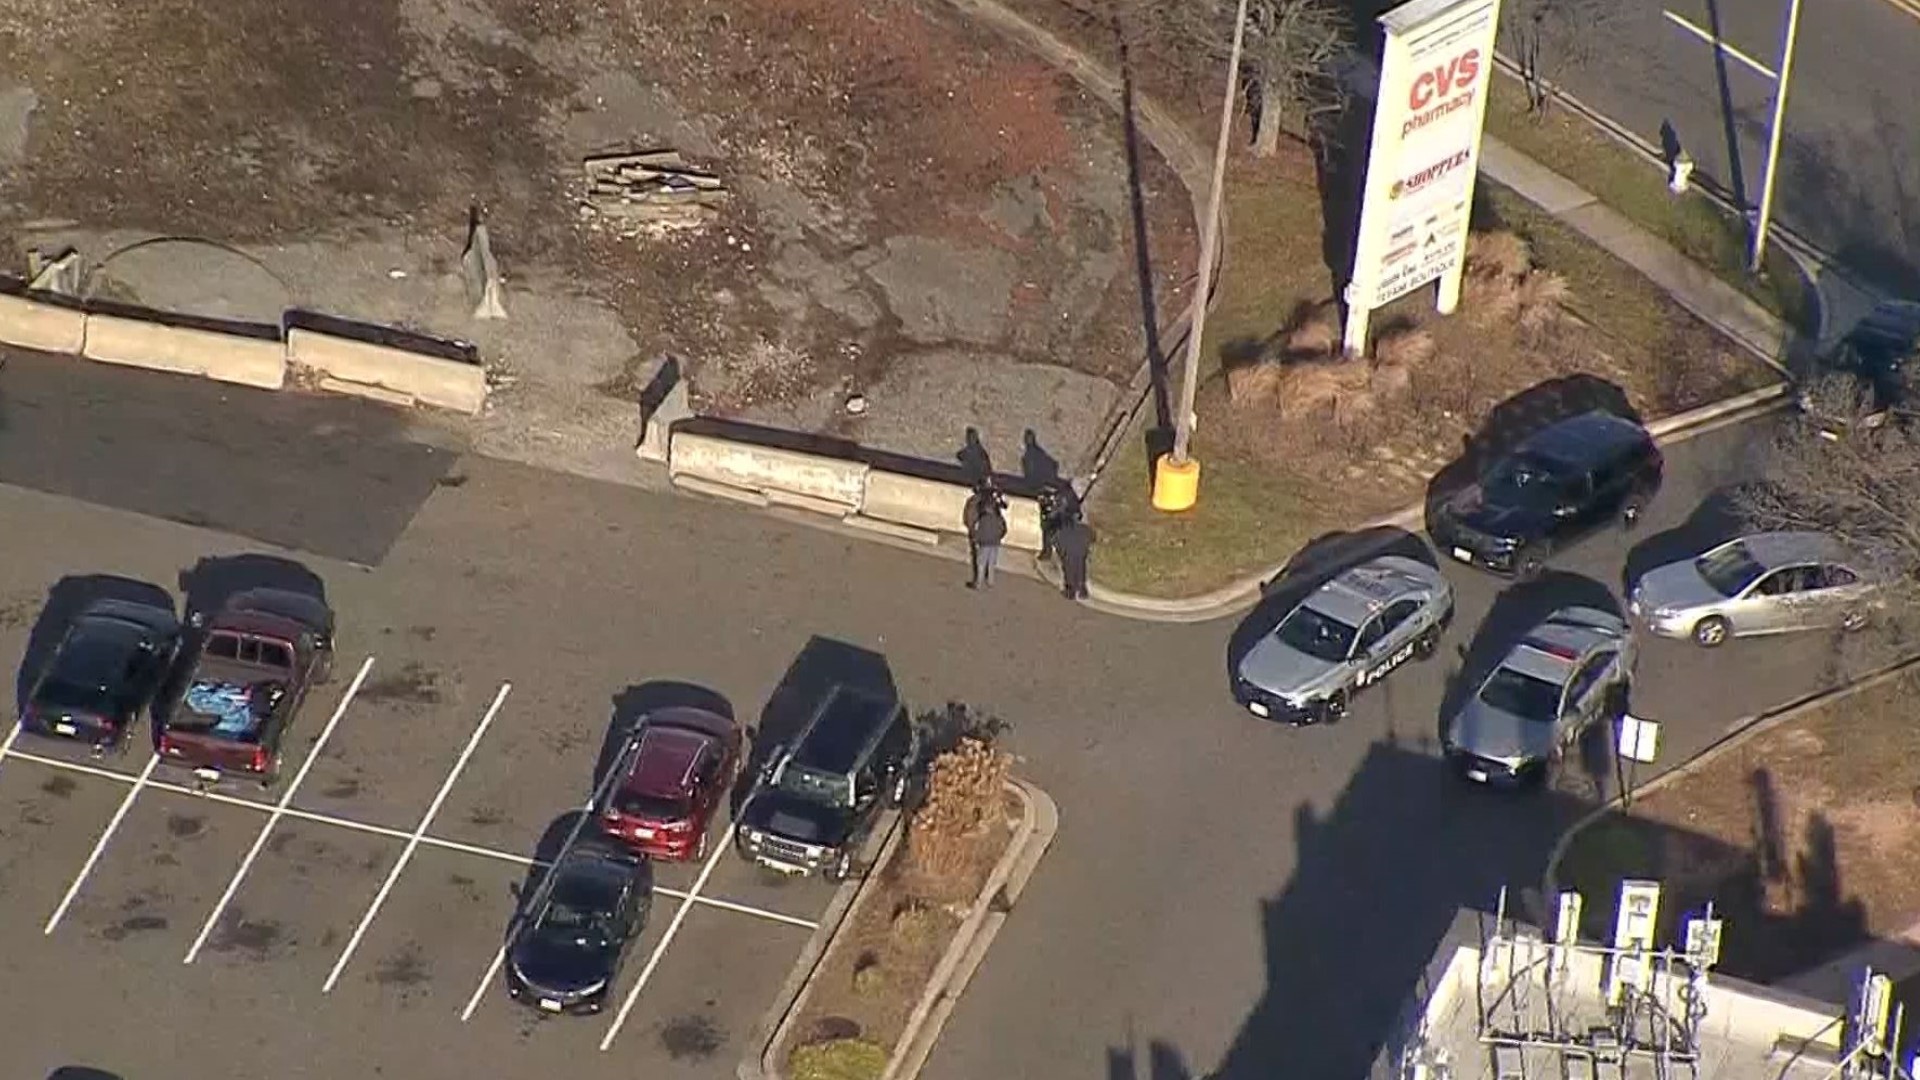 Police were on the scene at King Shopping Center in Hyattsville Monday afternoon.